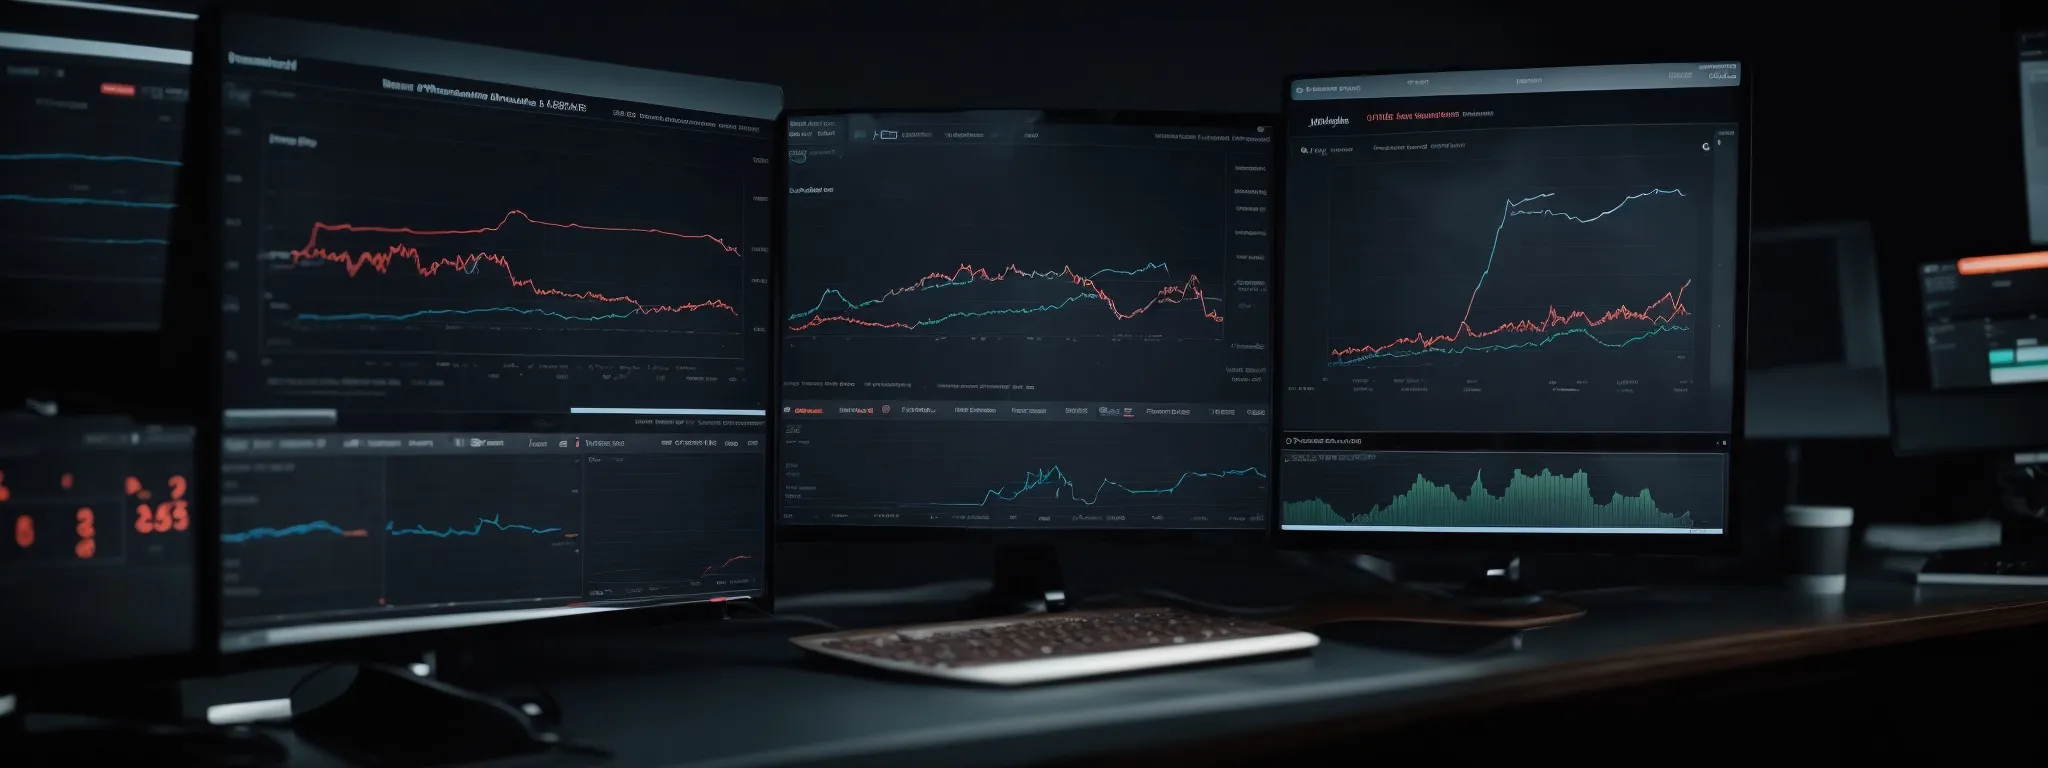 a sleek dashboard on a computer screen displaying graphs and data analysis for seo performance.